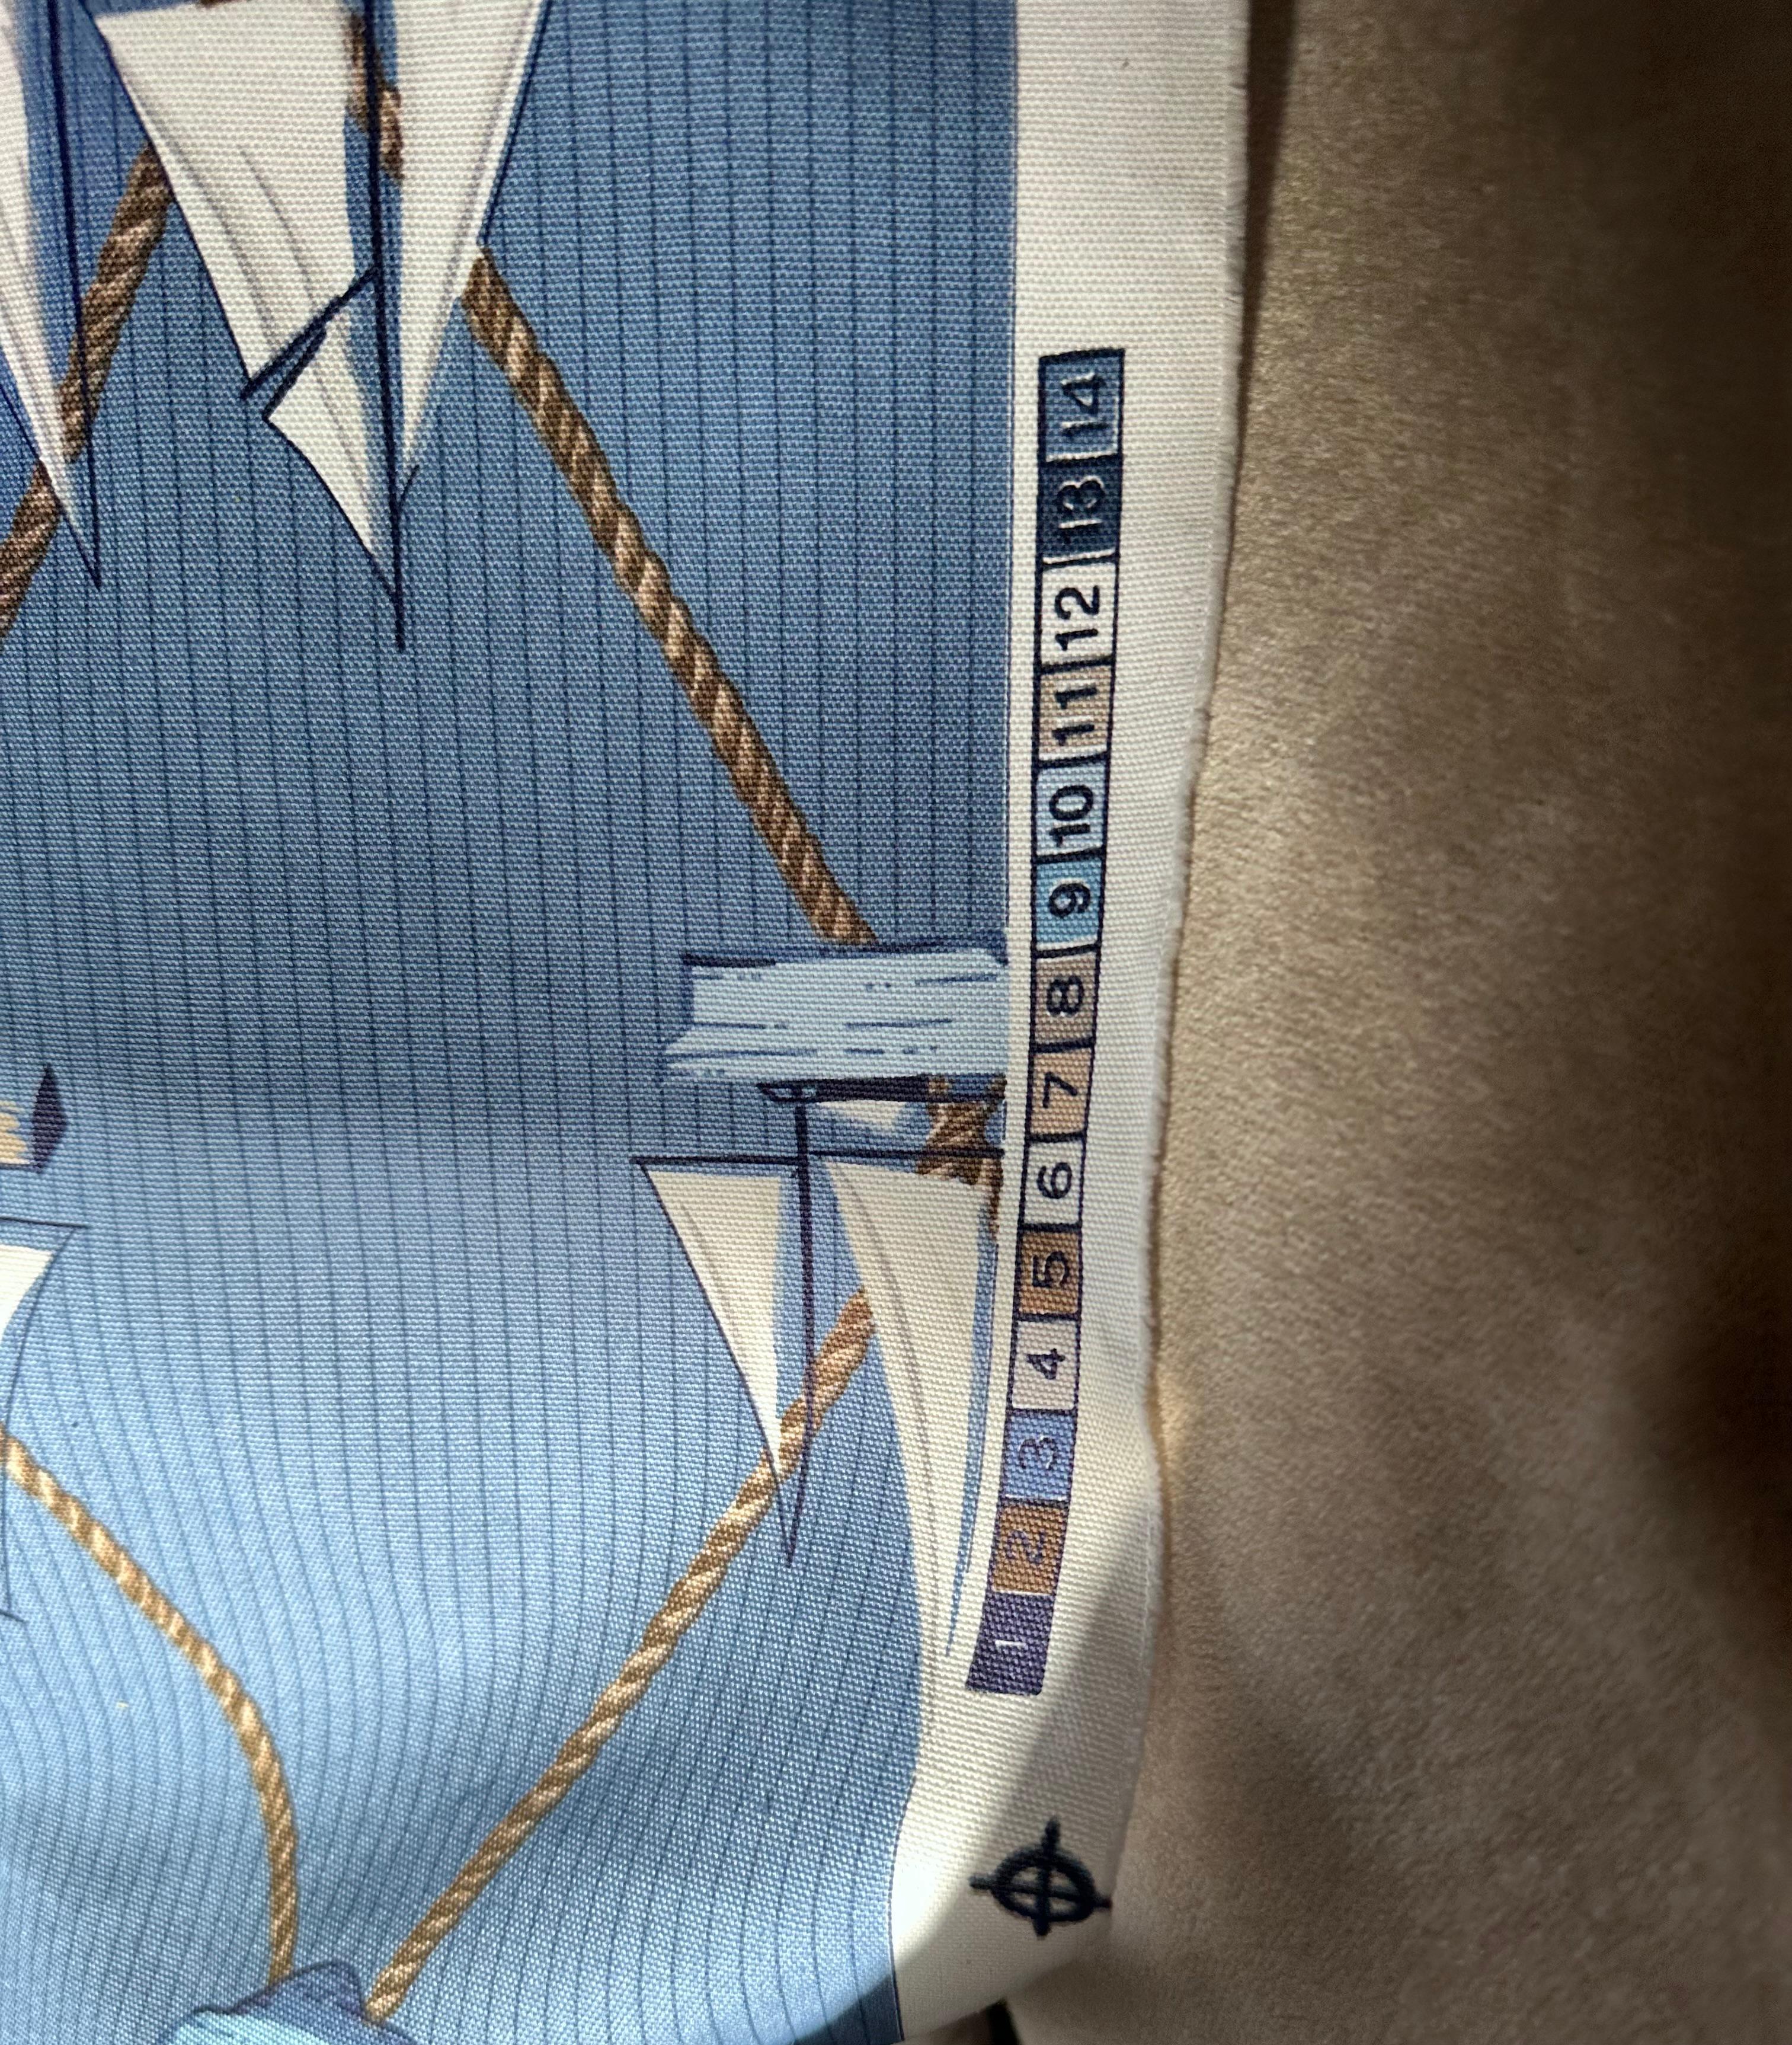 Schumacher Sailboats Nautical Textile Yardage, Cotton, Blue, Vintage, 1990s In Good Condition For Sale In Brooklyn, NY